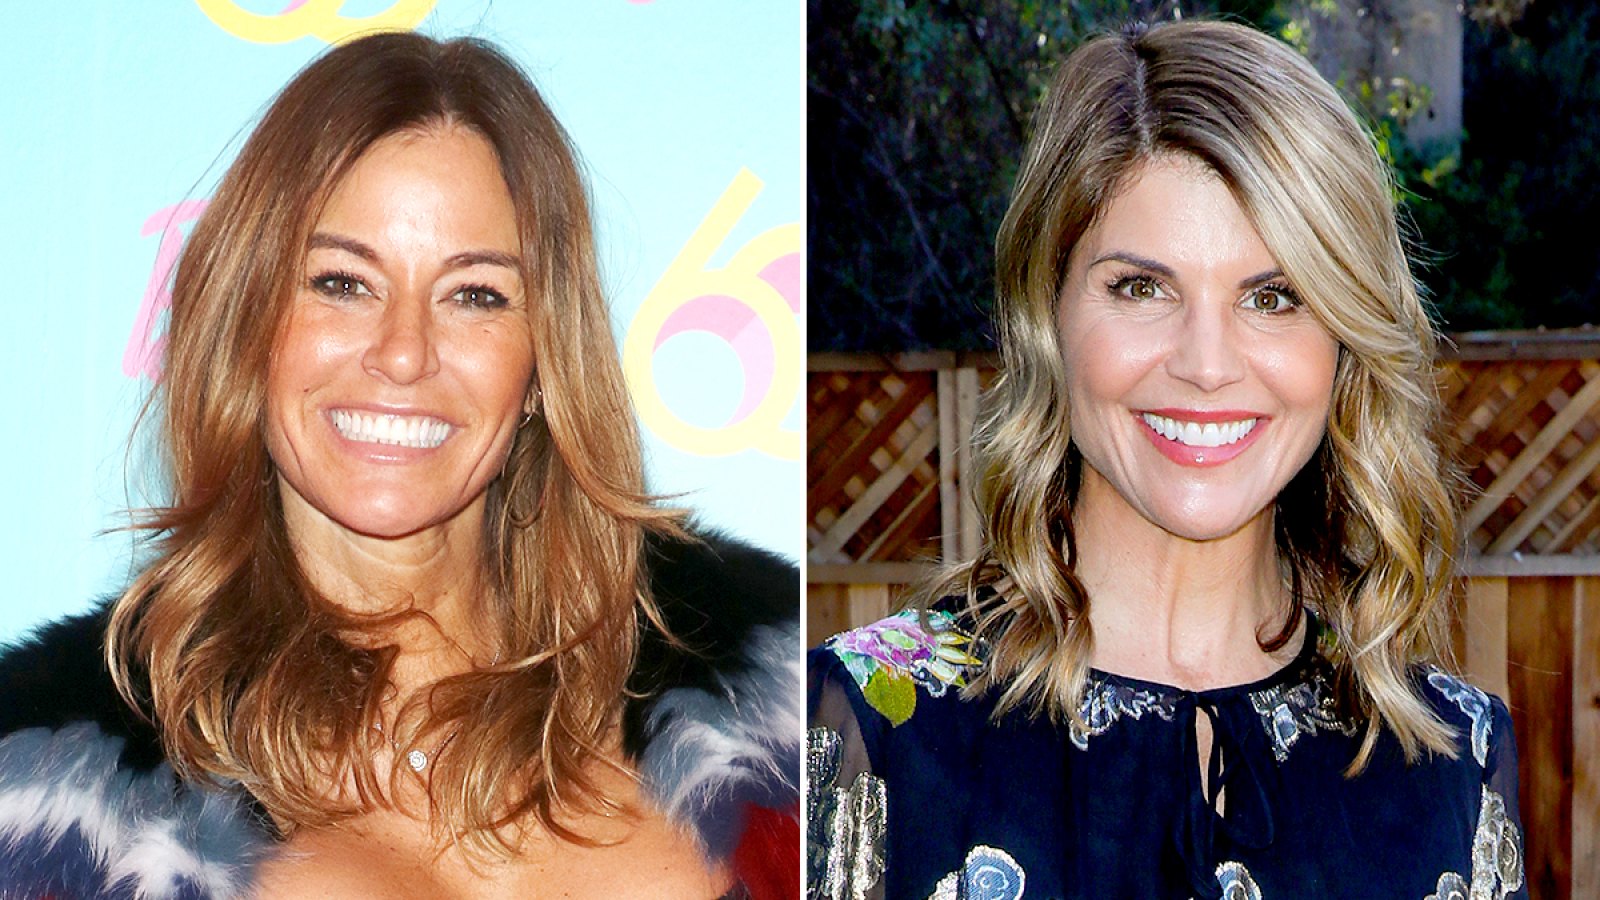 Kelly-Bensimon--Lori-Loughlin-Should-Be-a-Real-Housewife-After-College-Scam